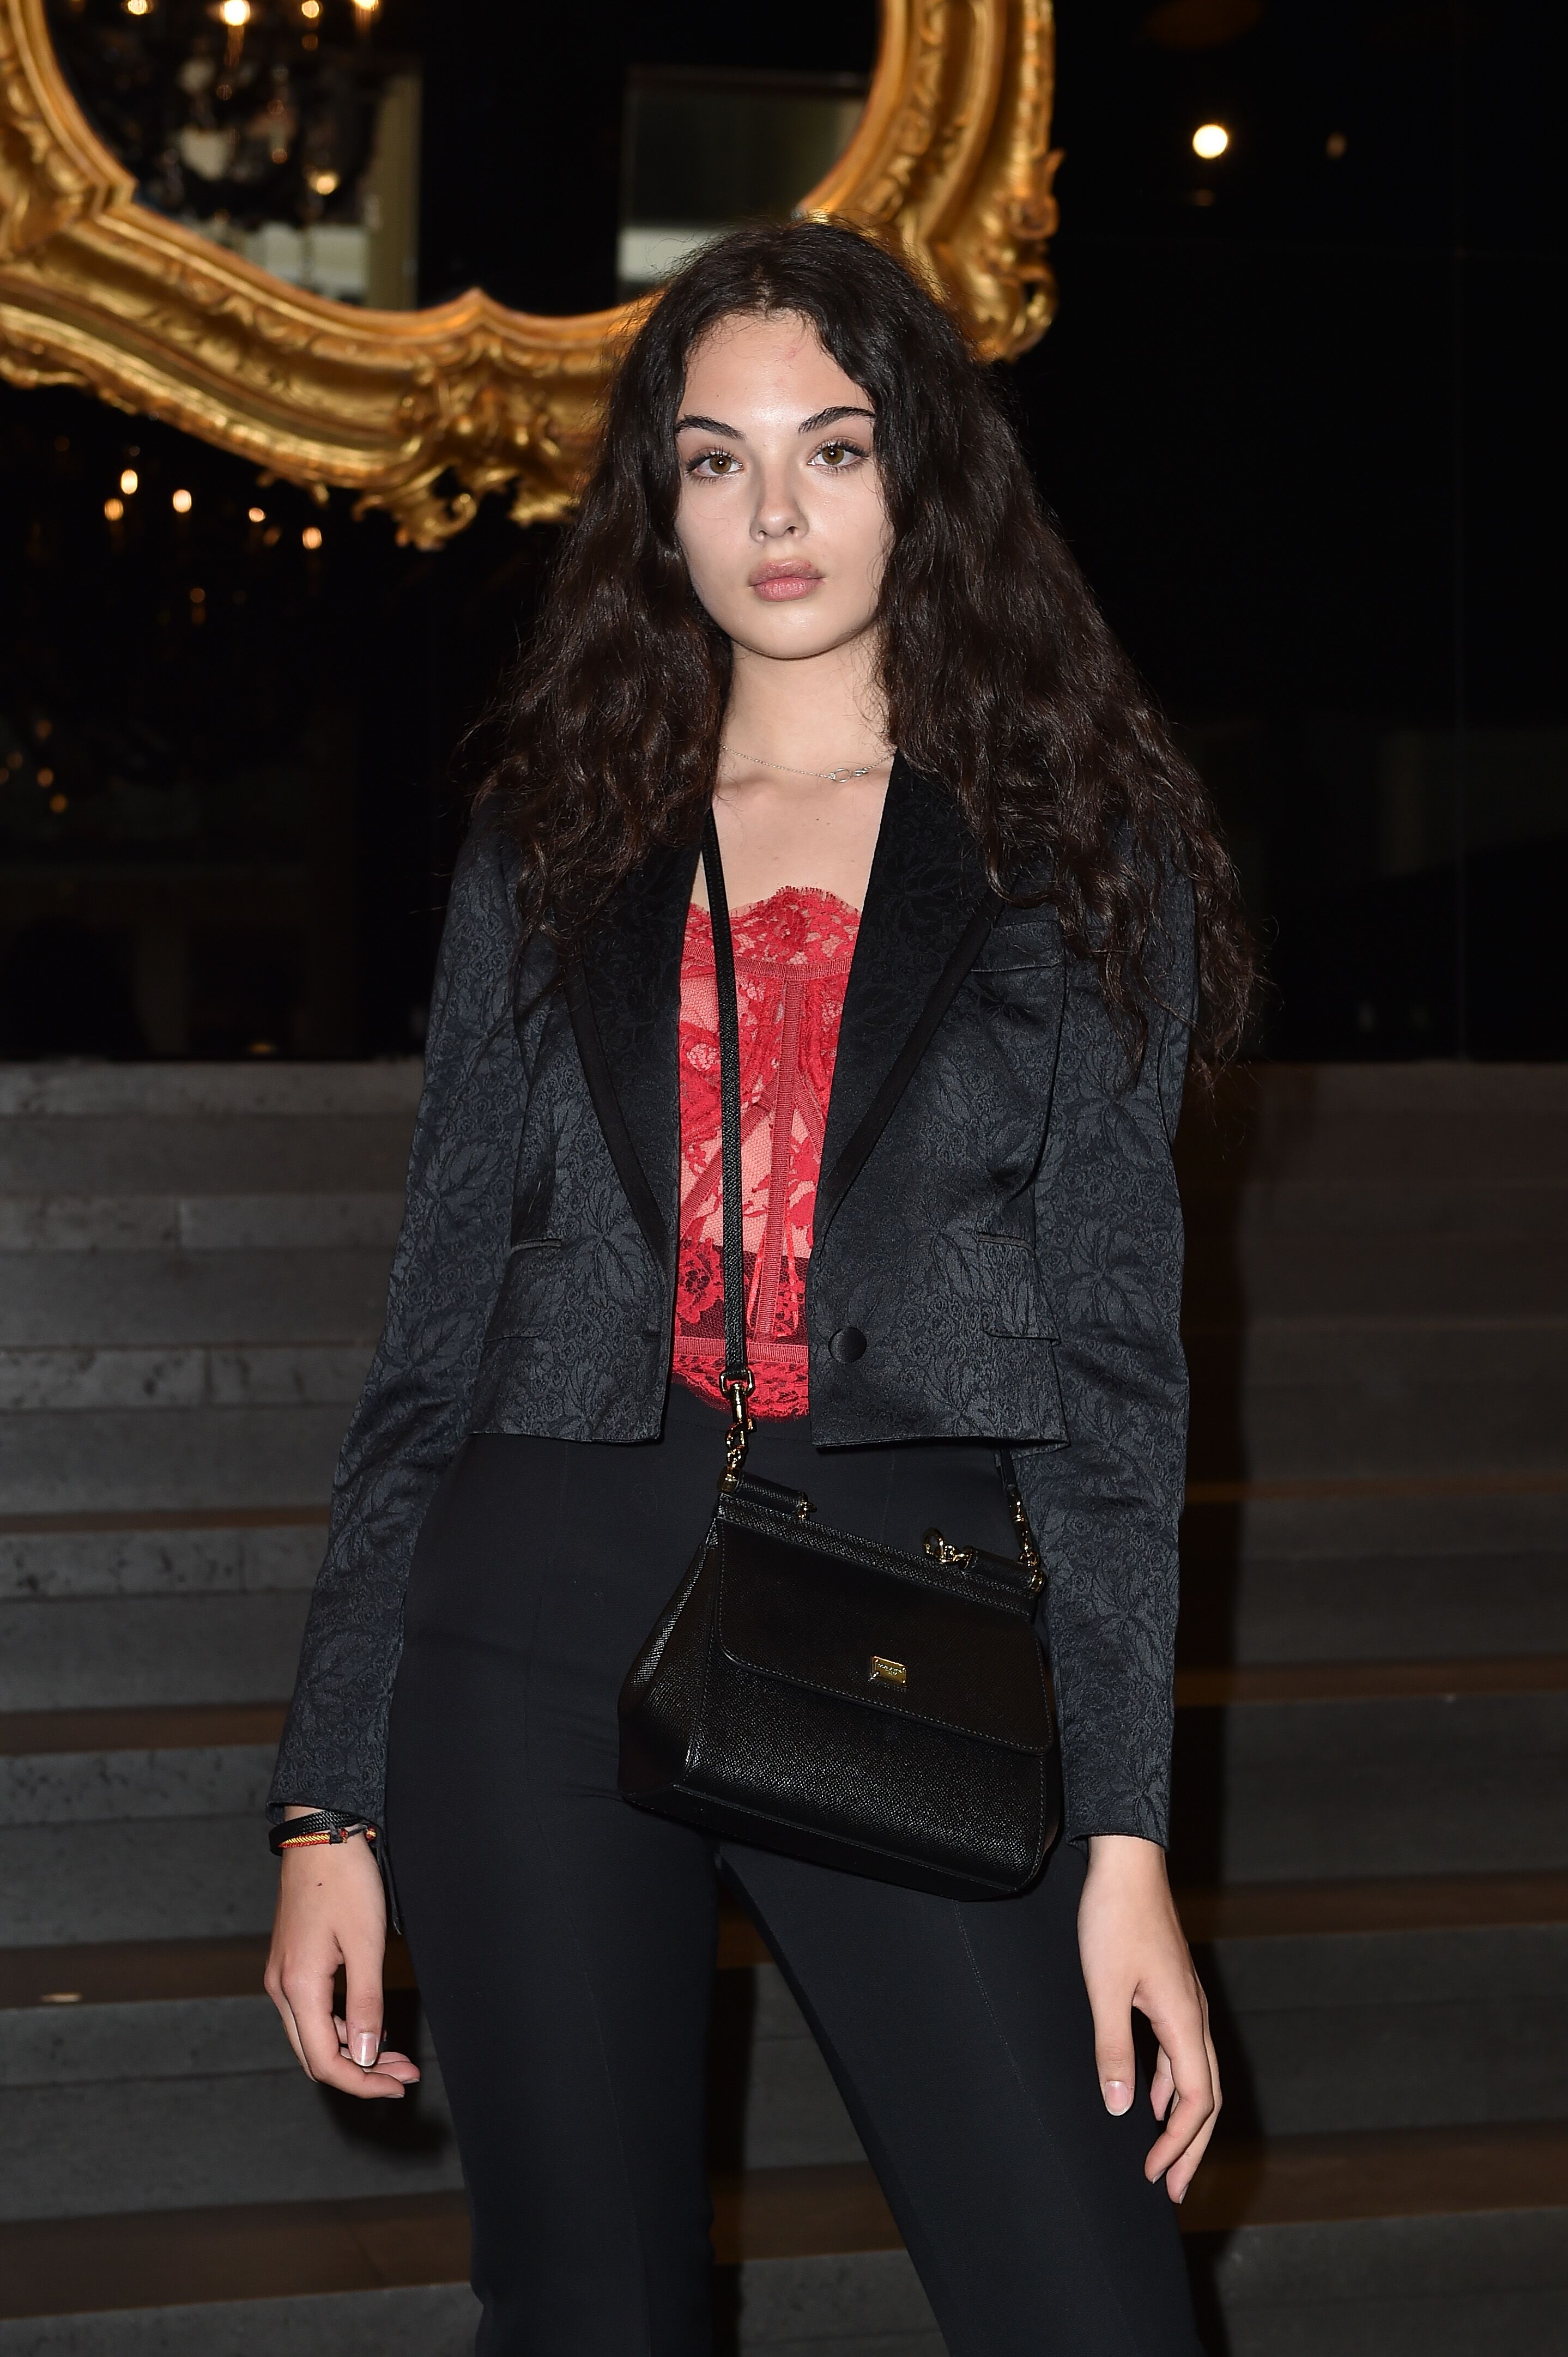 Virgo Cassel at the Dolce & Gabbana fashion show in Milan. | Source: Getty Images